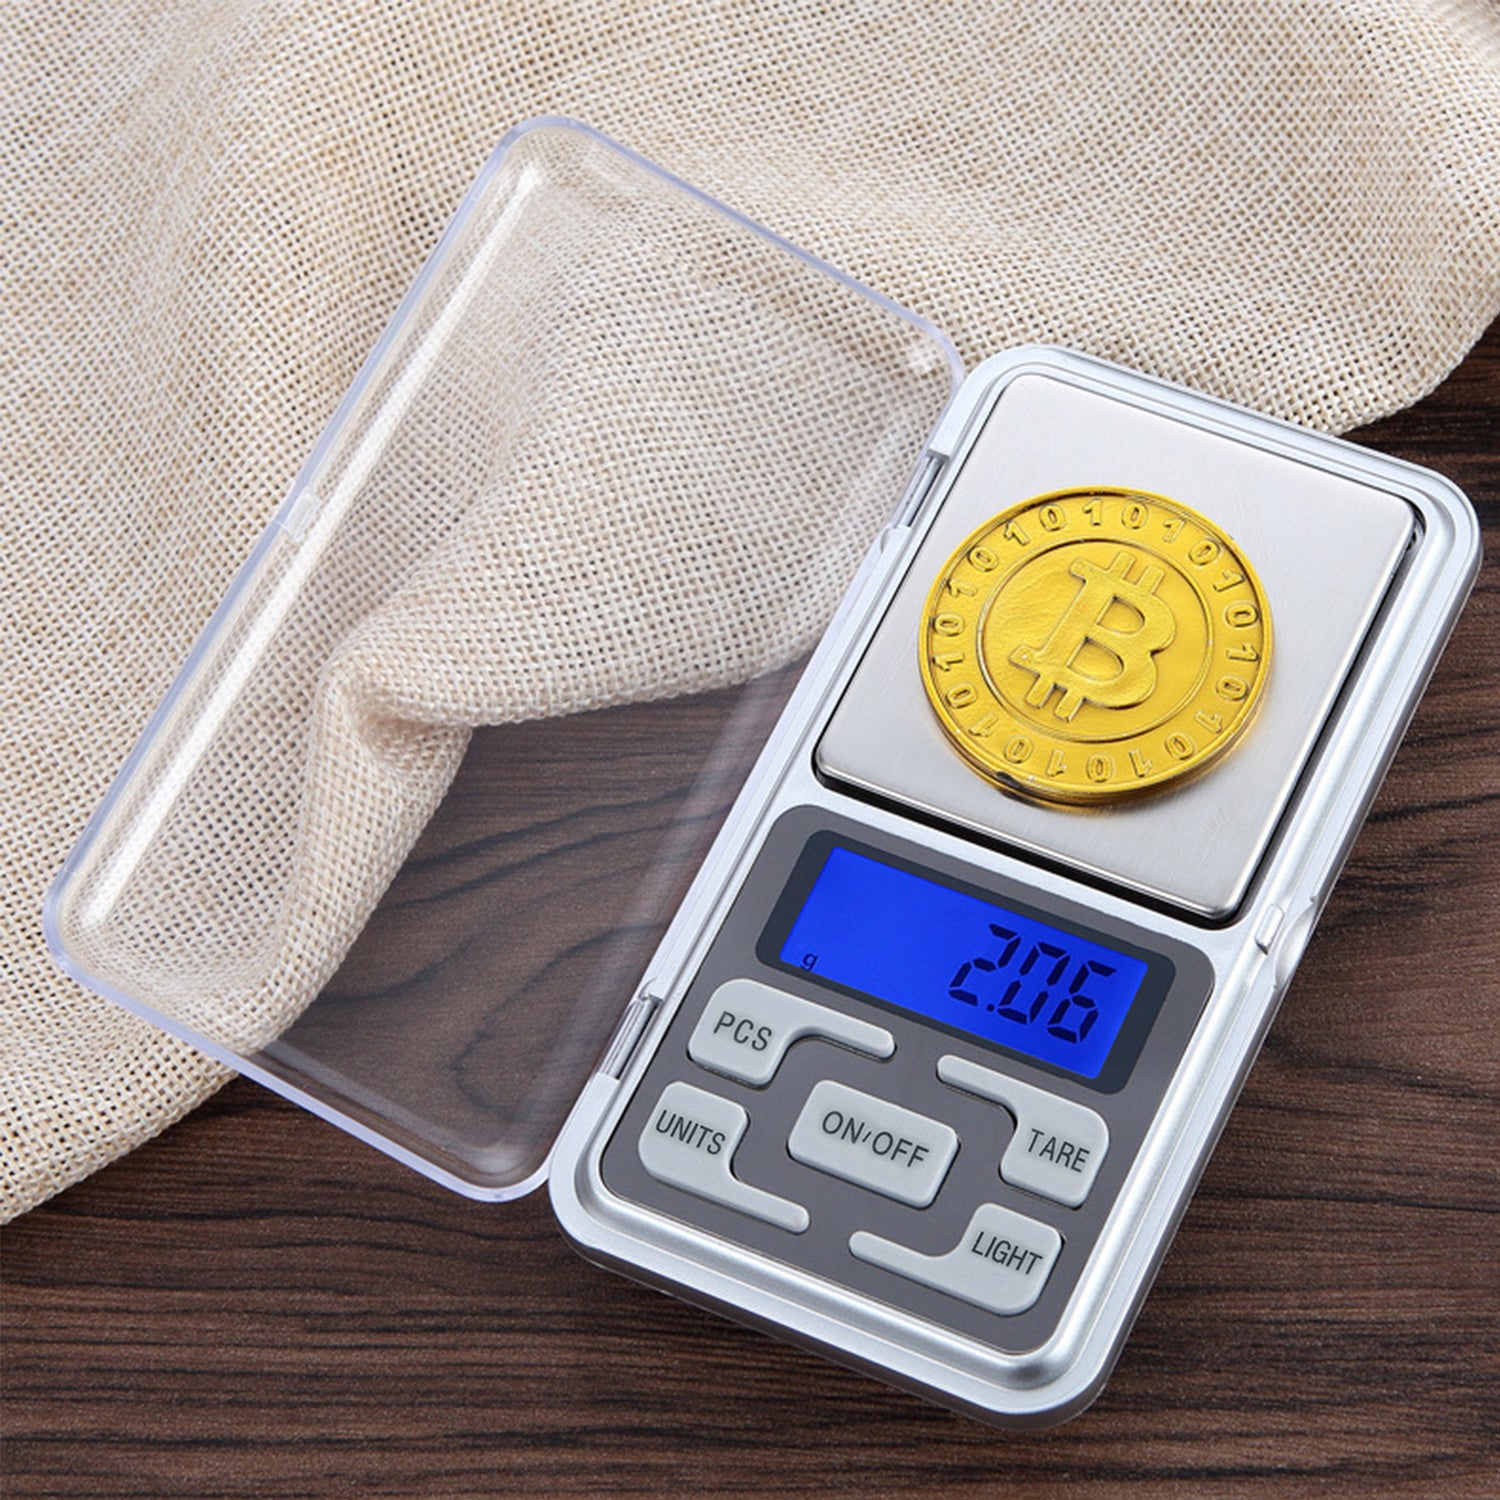 500g/ 0.01g Small Pocket Jewelry Scale, Digital Kitchen Scale with 2 Trays,  Stainless Steel Gram Scales Weight Gram and Oz, Digital Herb Scale, Silver